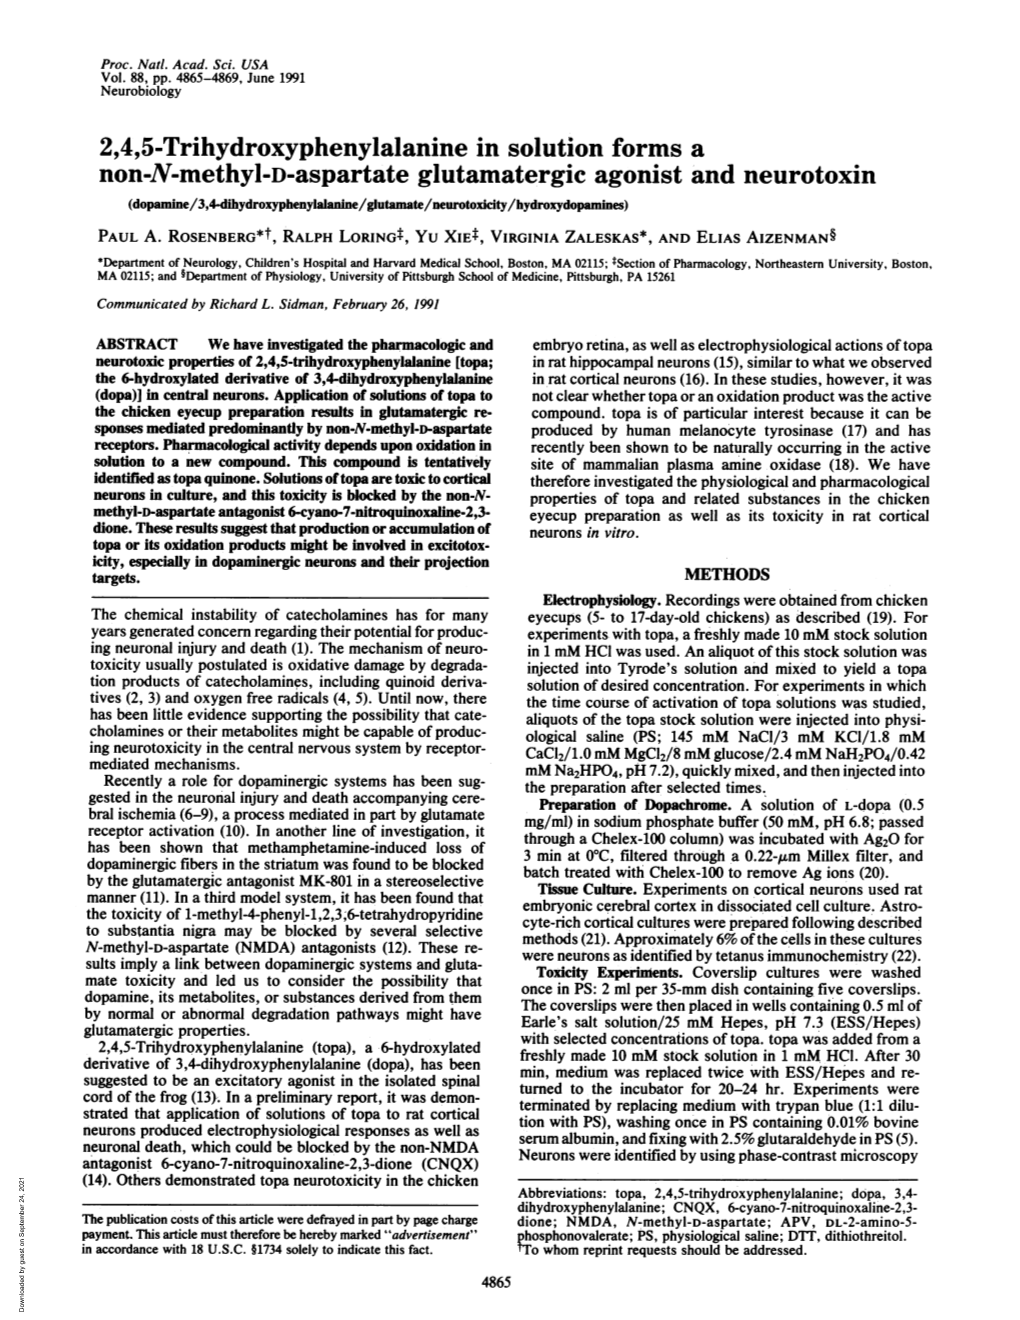 2,4,5-Trihydroxyphenylalanine in Solution Forms a Non-N-Methyl-D